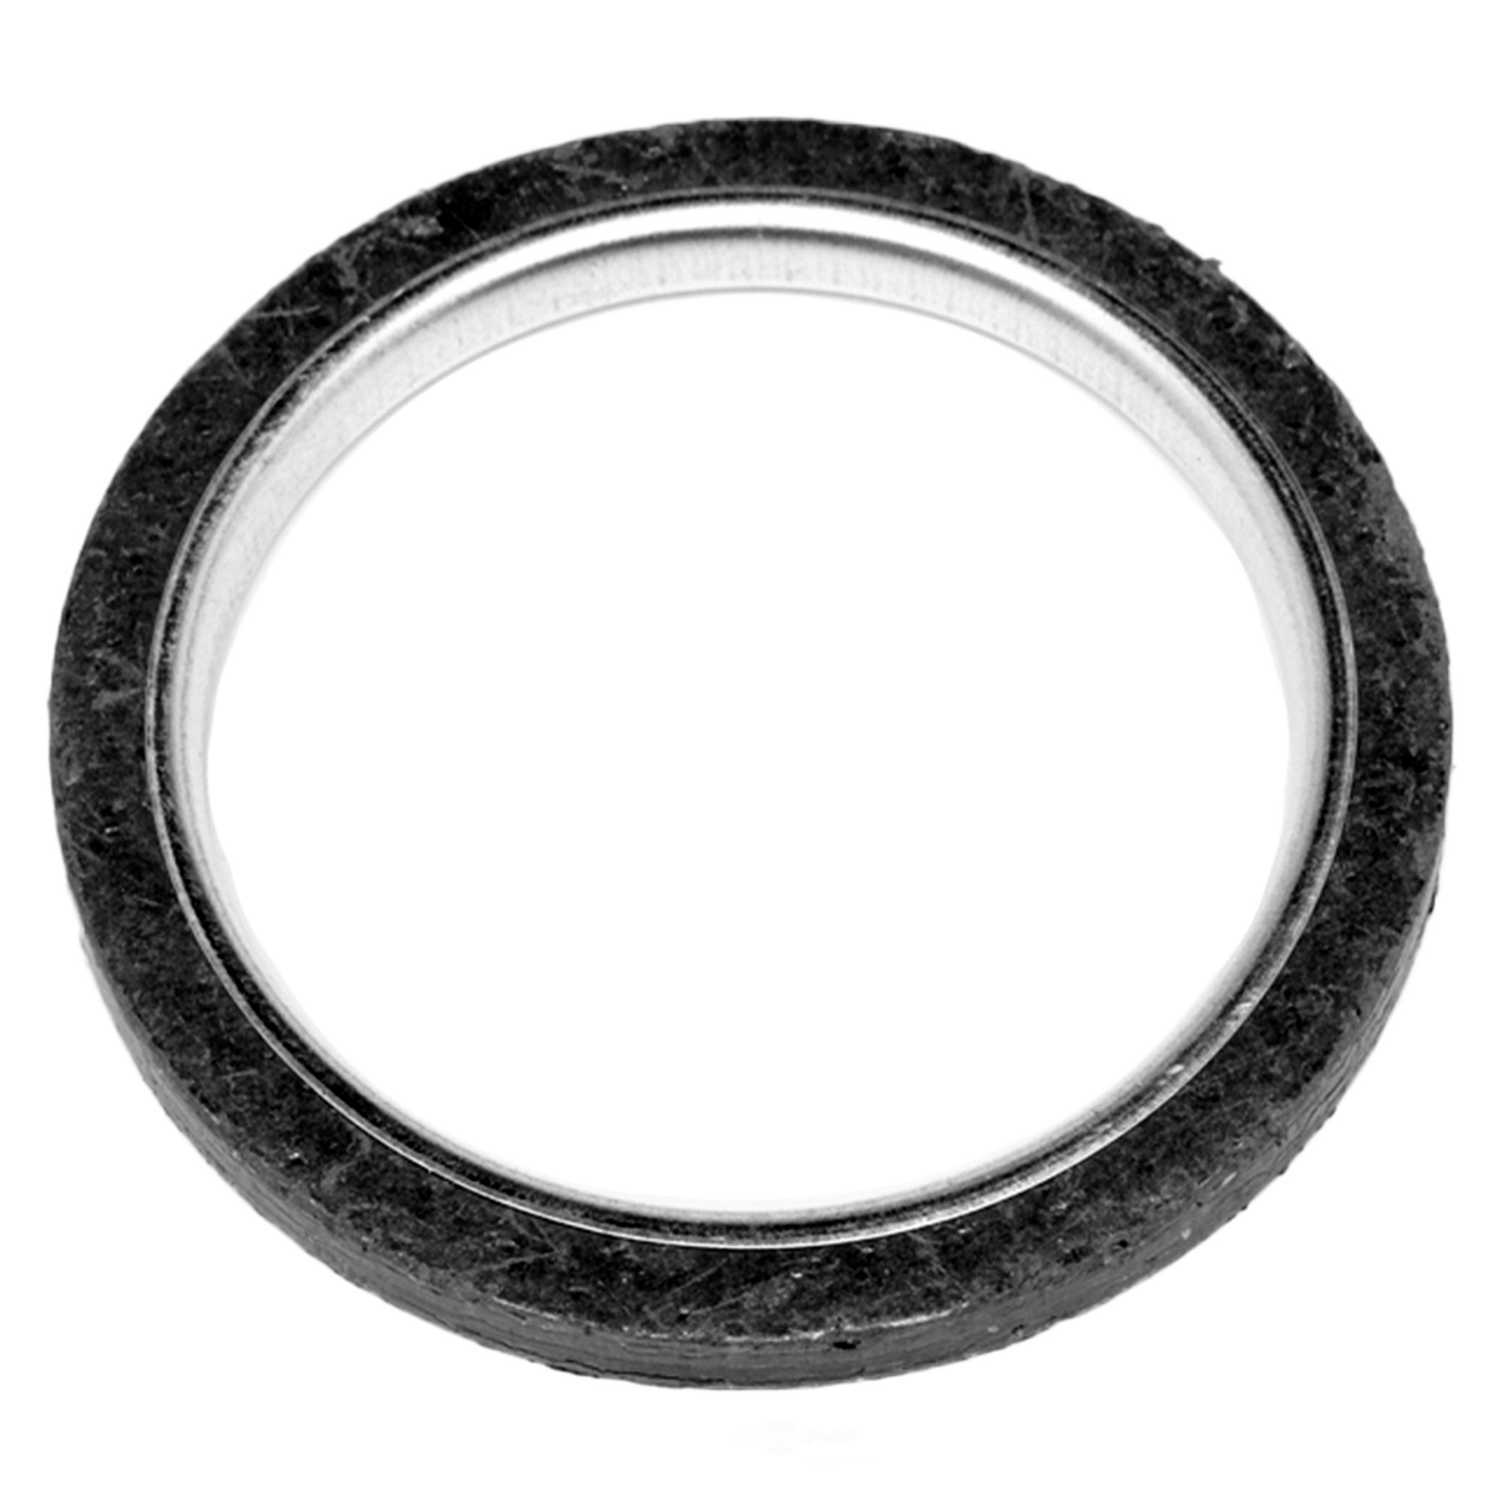 WALKER - Exhaust Pipe Flange Gasket (Pipe To Resonator Assembly) - WAL 31321